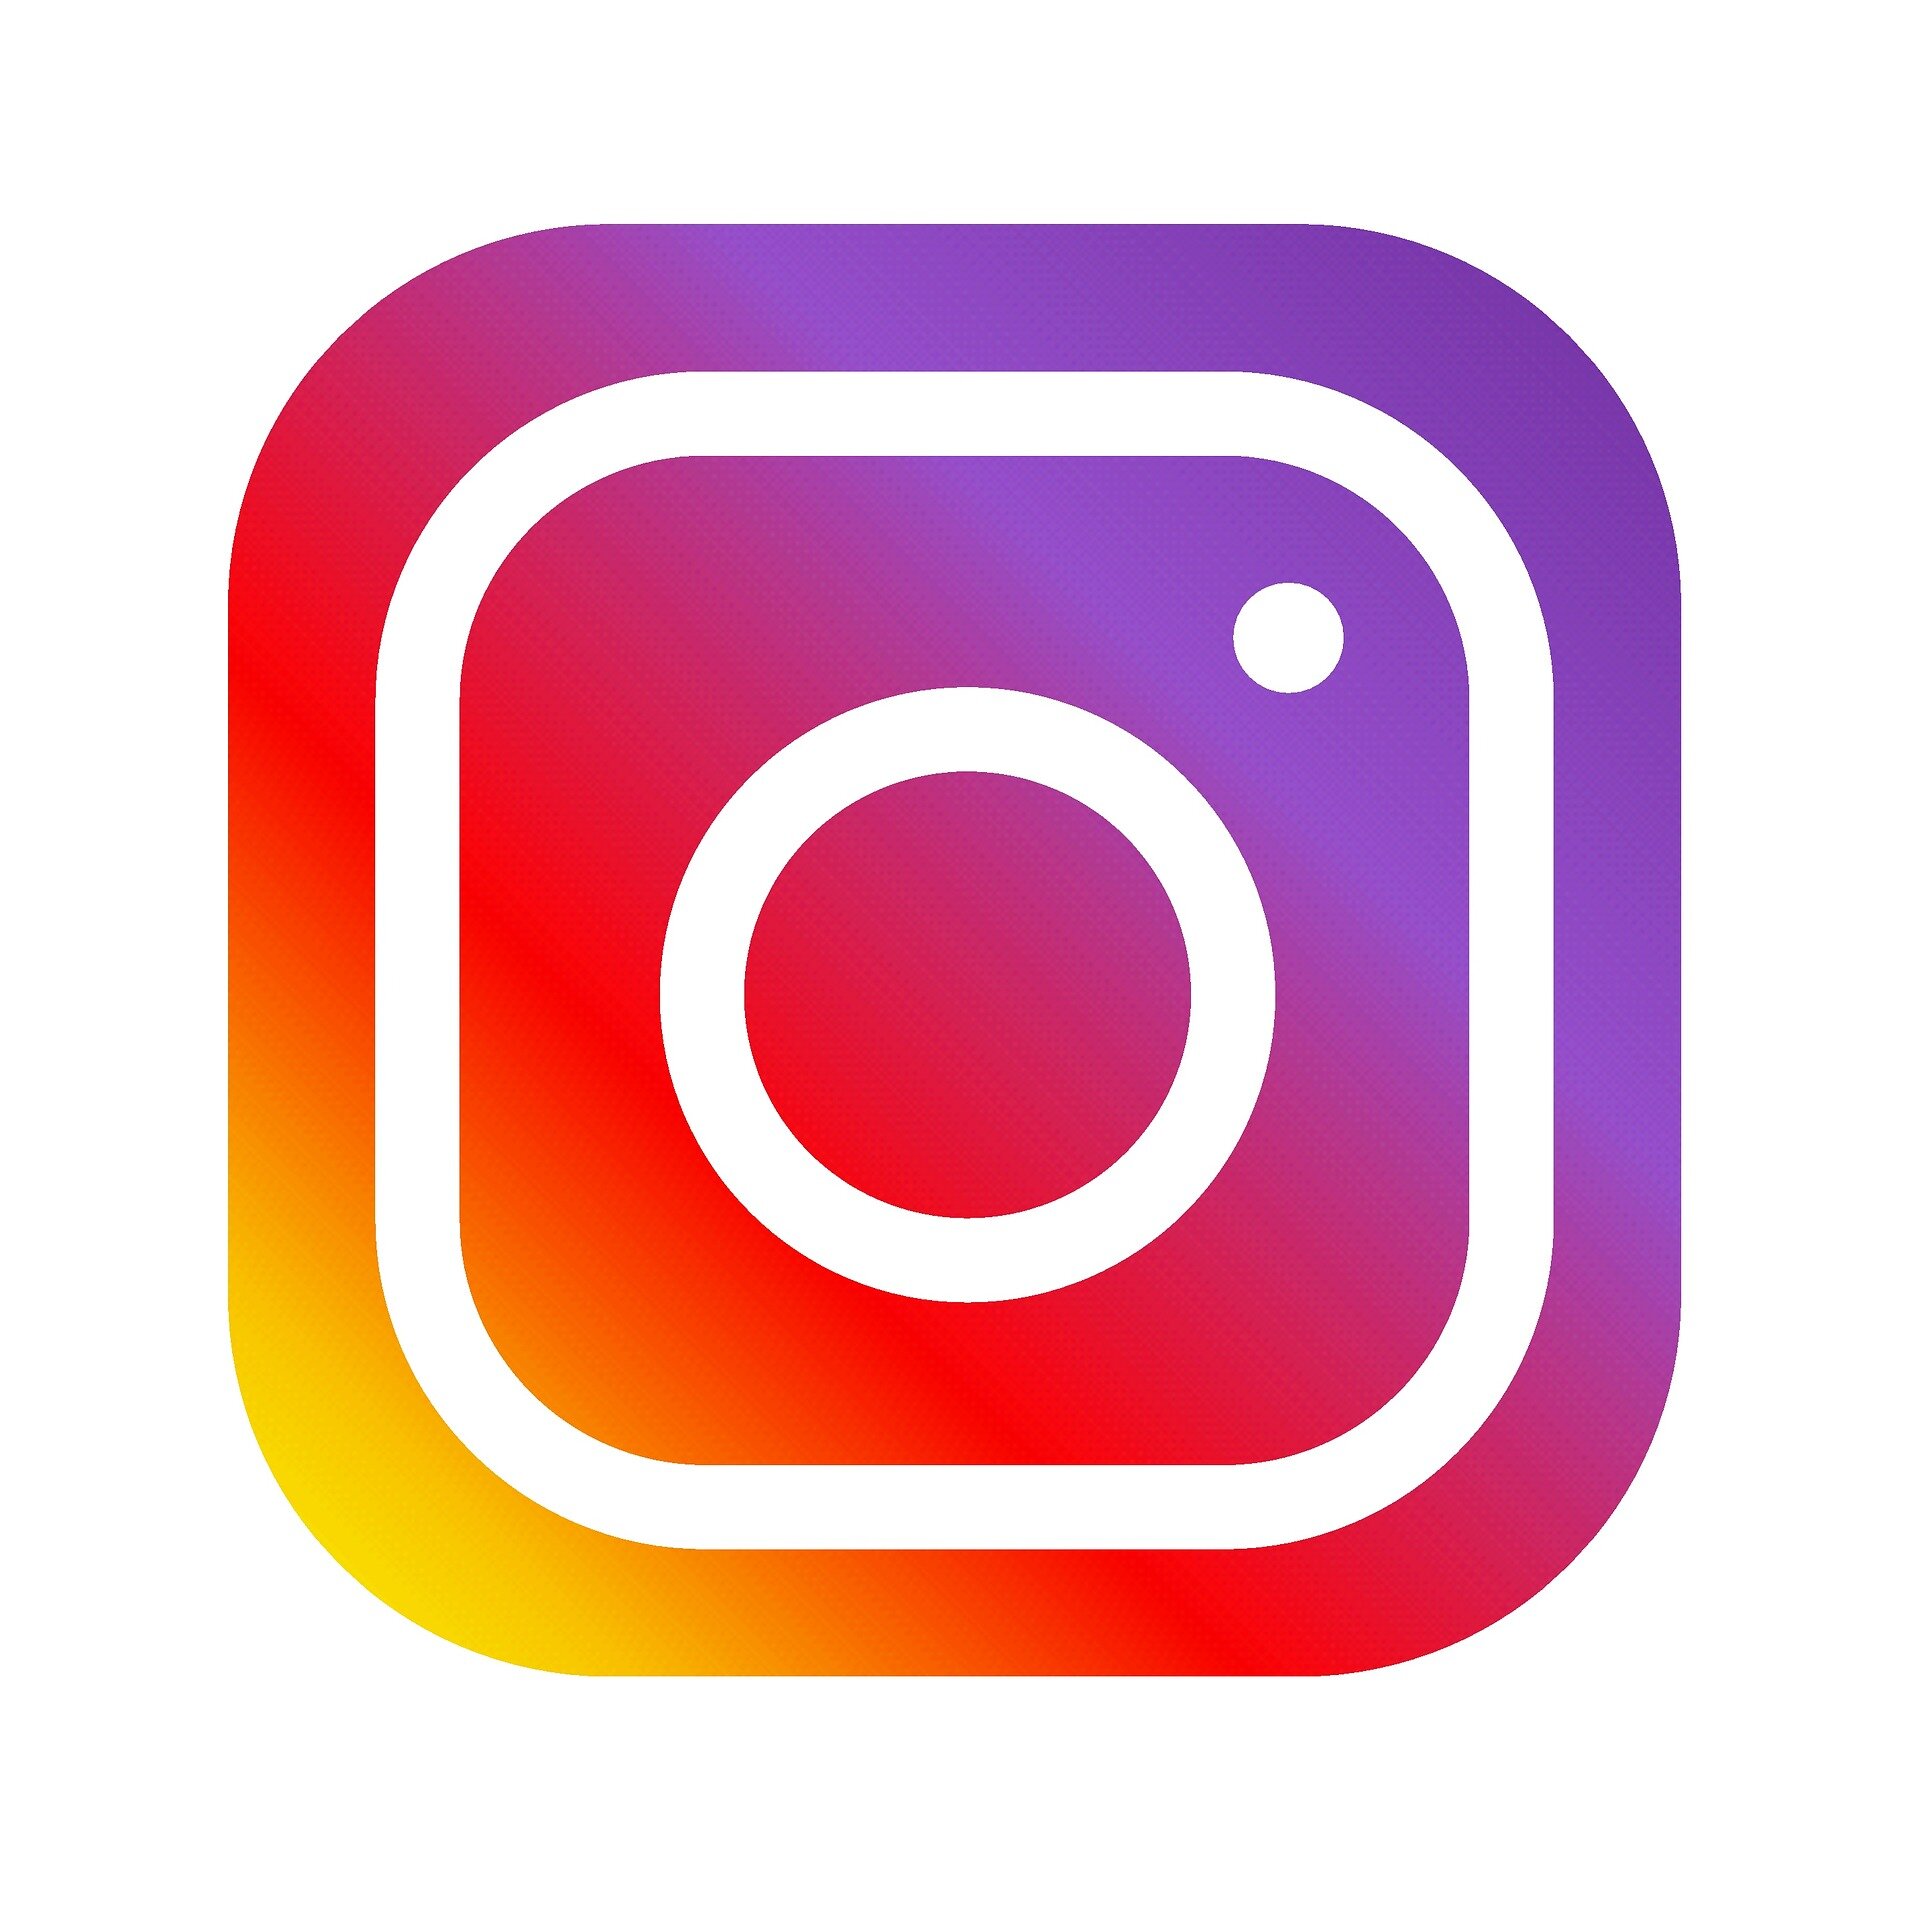 [Free] Premium Instagram Download Apk + All Features Unlocked with No